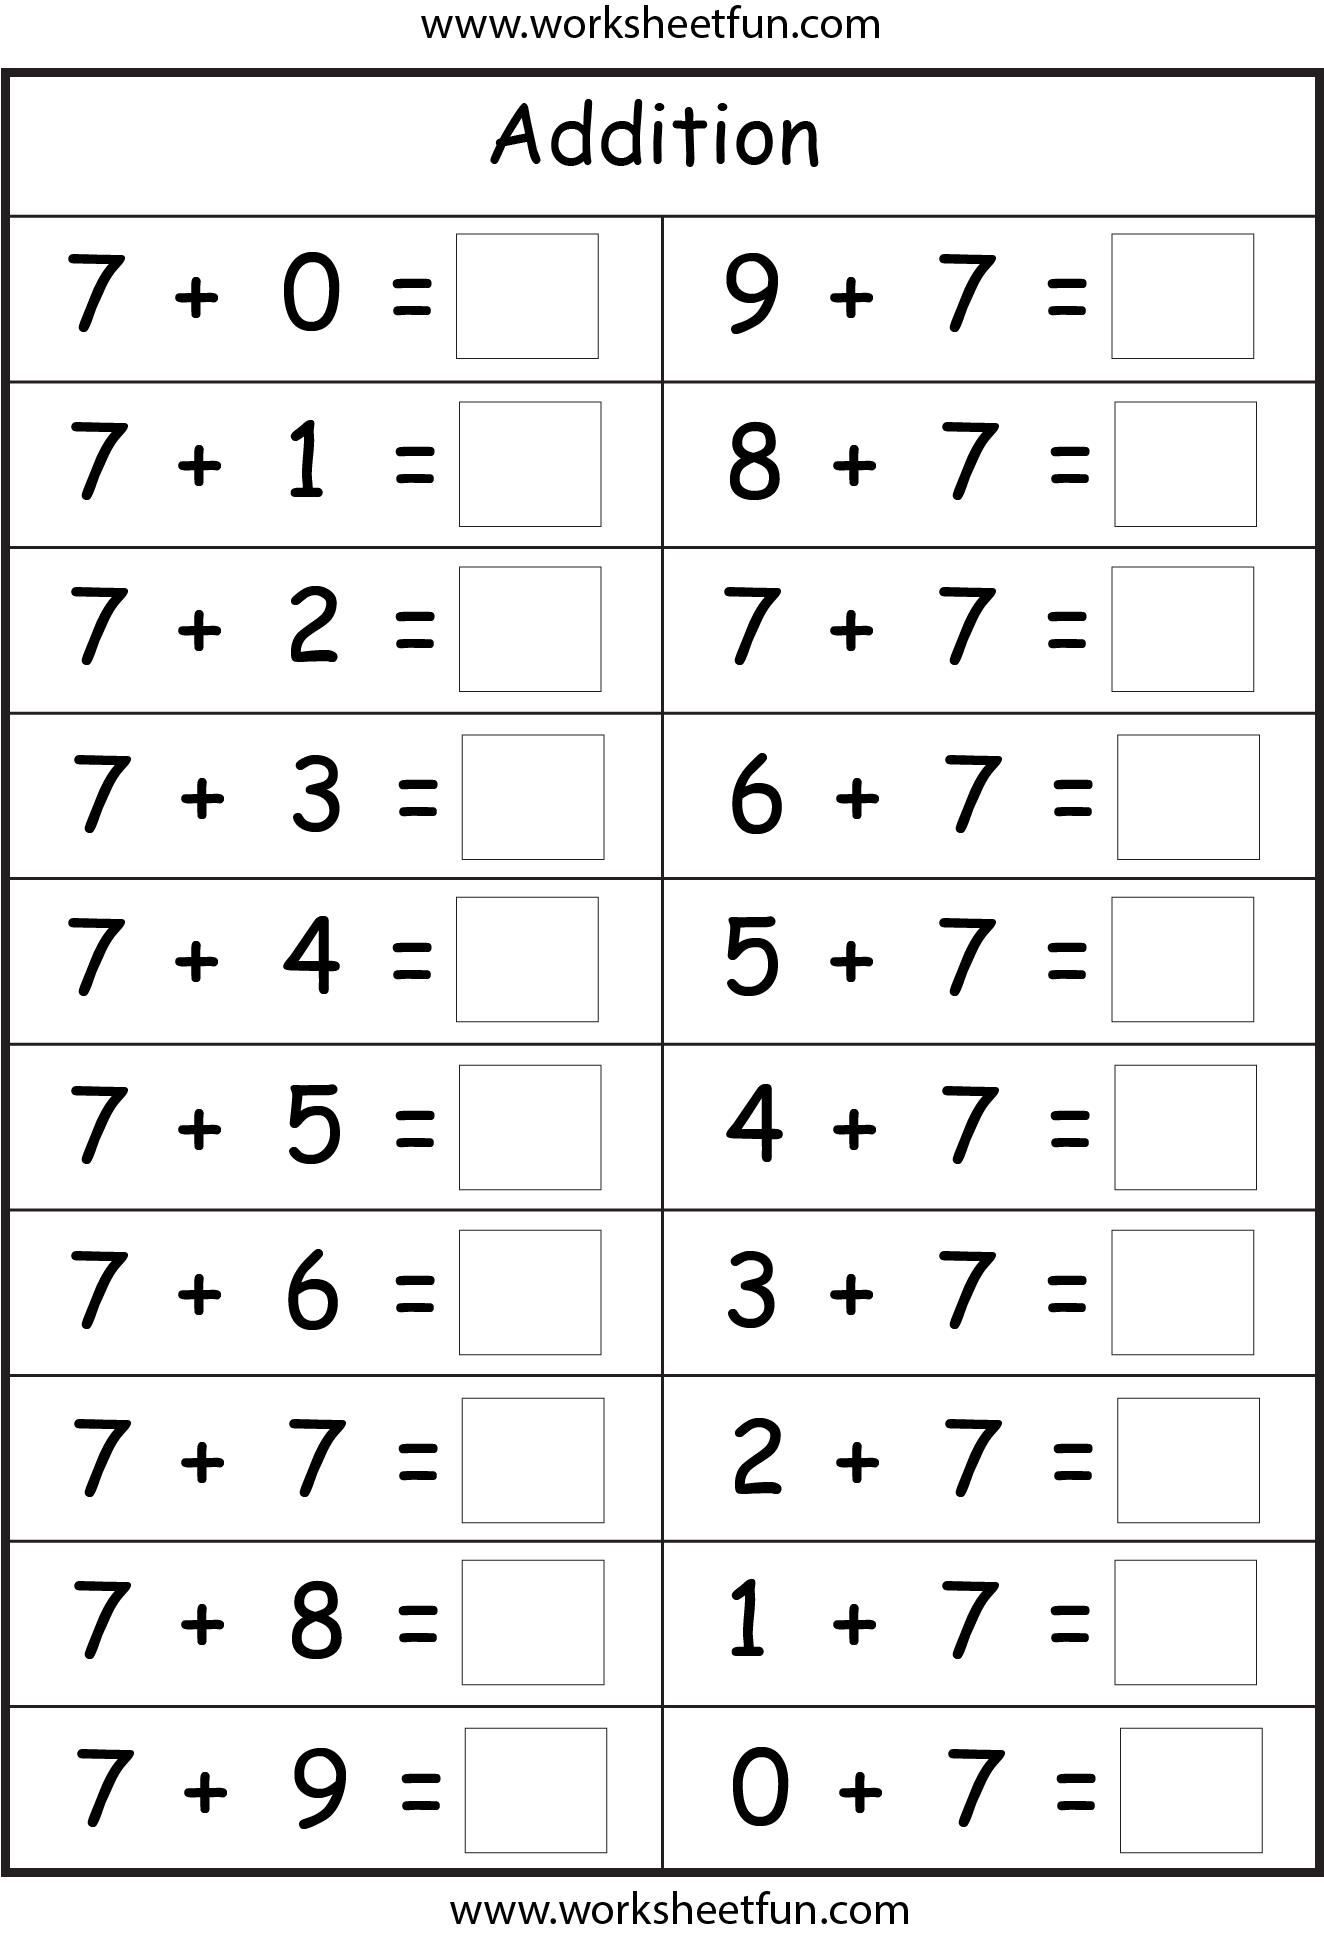 29-addition-math-facts-worksheets-images-the-math